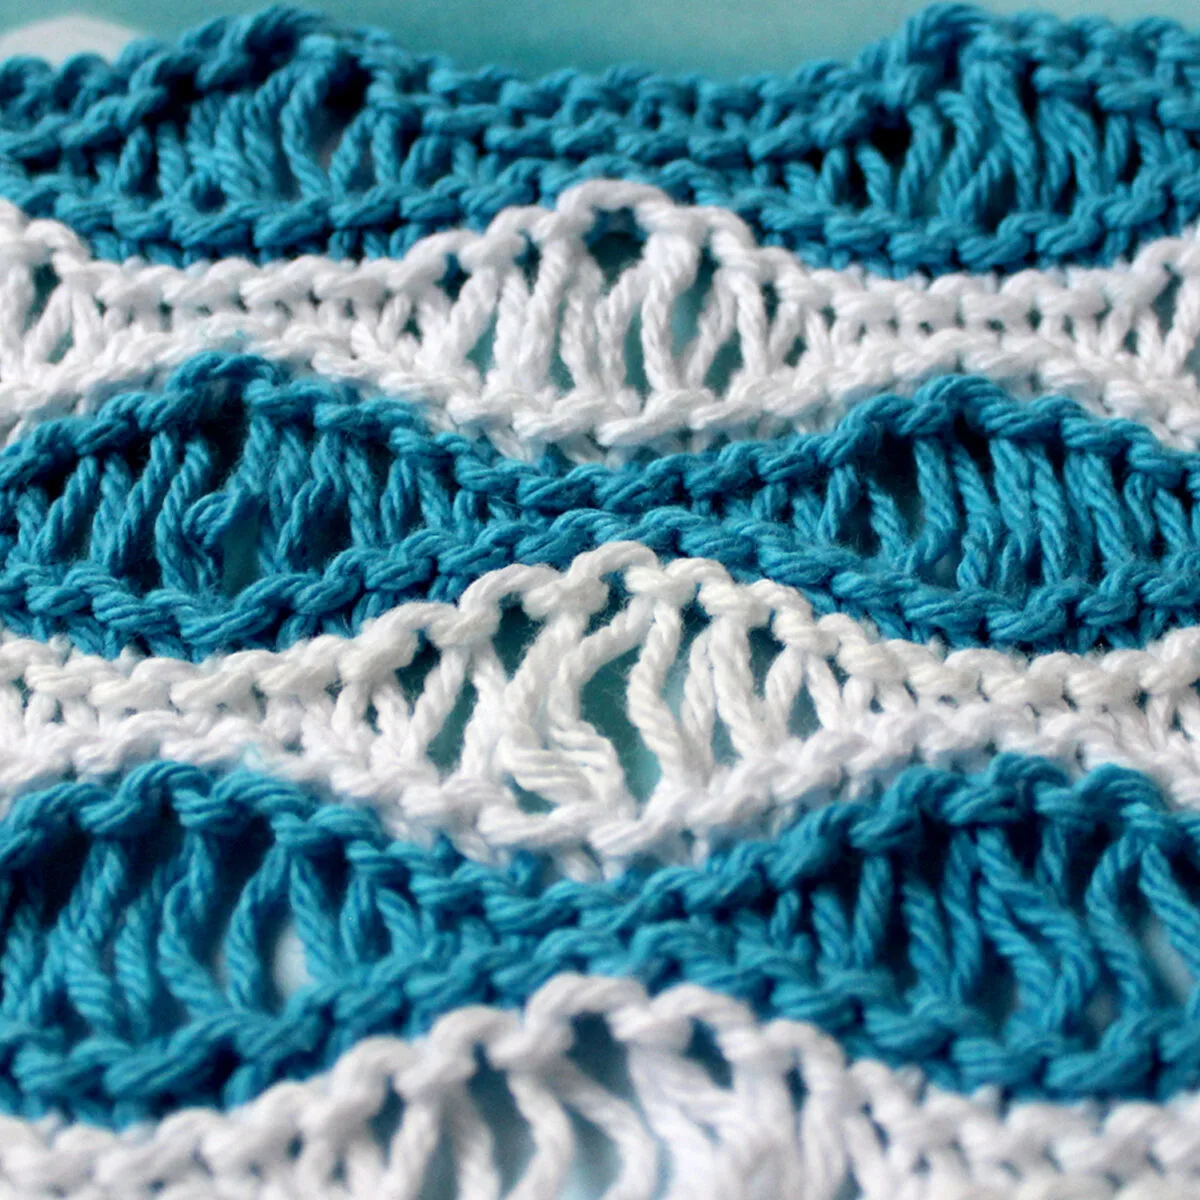 Knitted swatch in Sea Foam Wave pattern in horizontal stripes of blue and white color yarn.